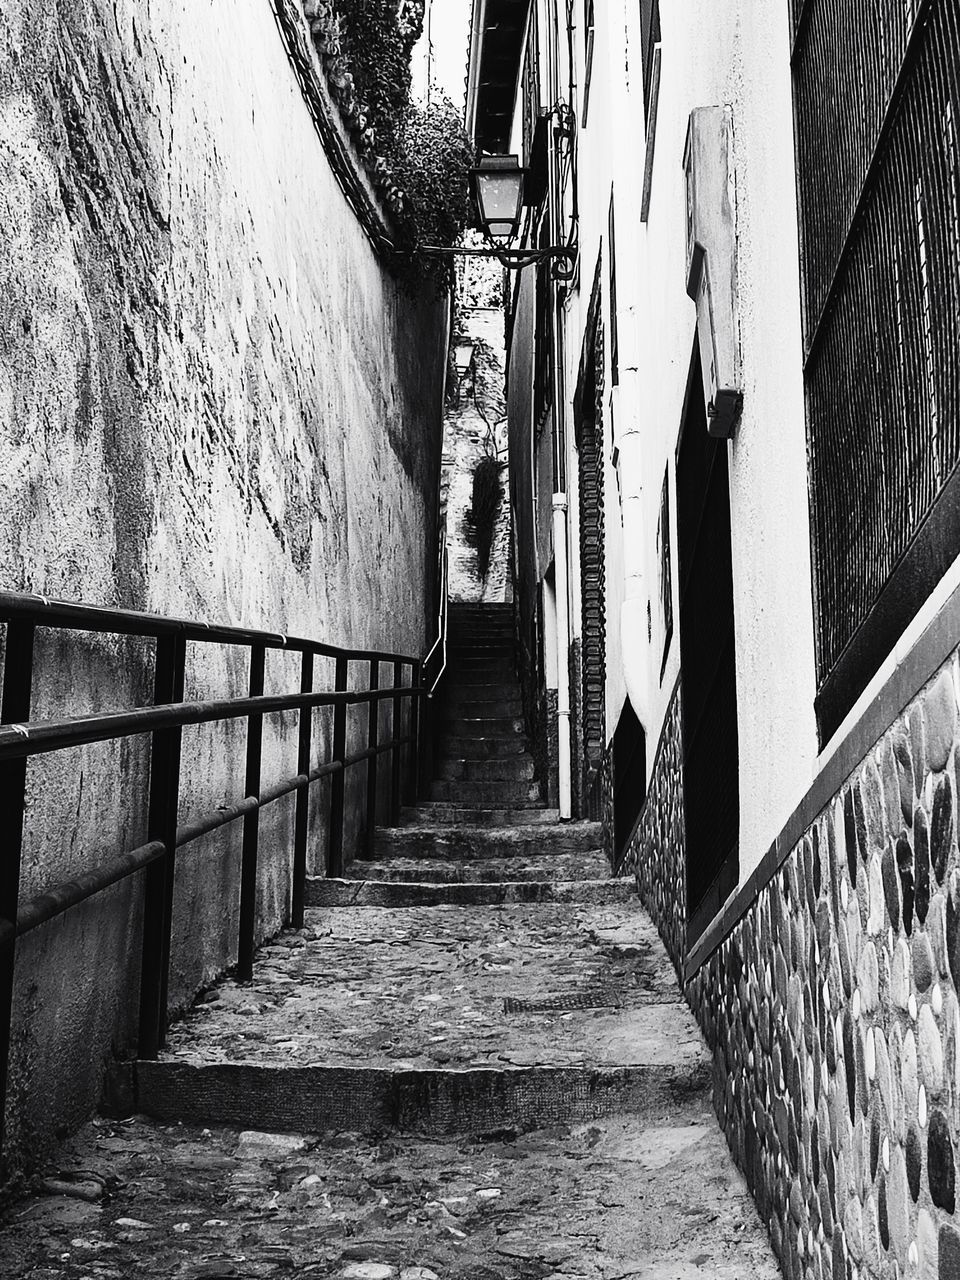 architecture, built structure, street, road, alley, black, the way forward, white, black and white, monochrome, building exterior, monochrome photography, railing, wall - building feature, day, staircase, infrastructure, building, urban area, no people, steps and staircases, footpath, narrow, wall, lane, outdoors, diminishing perspective, nature, city, darkness, sunlight